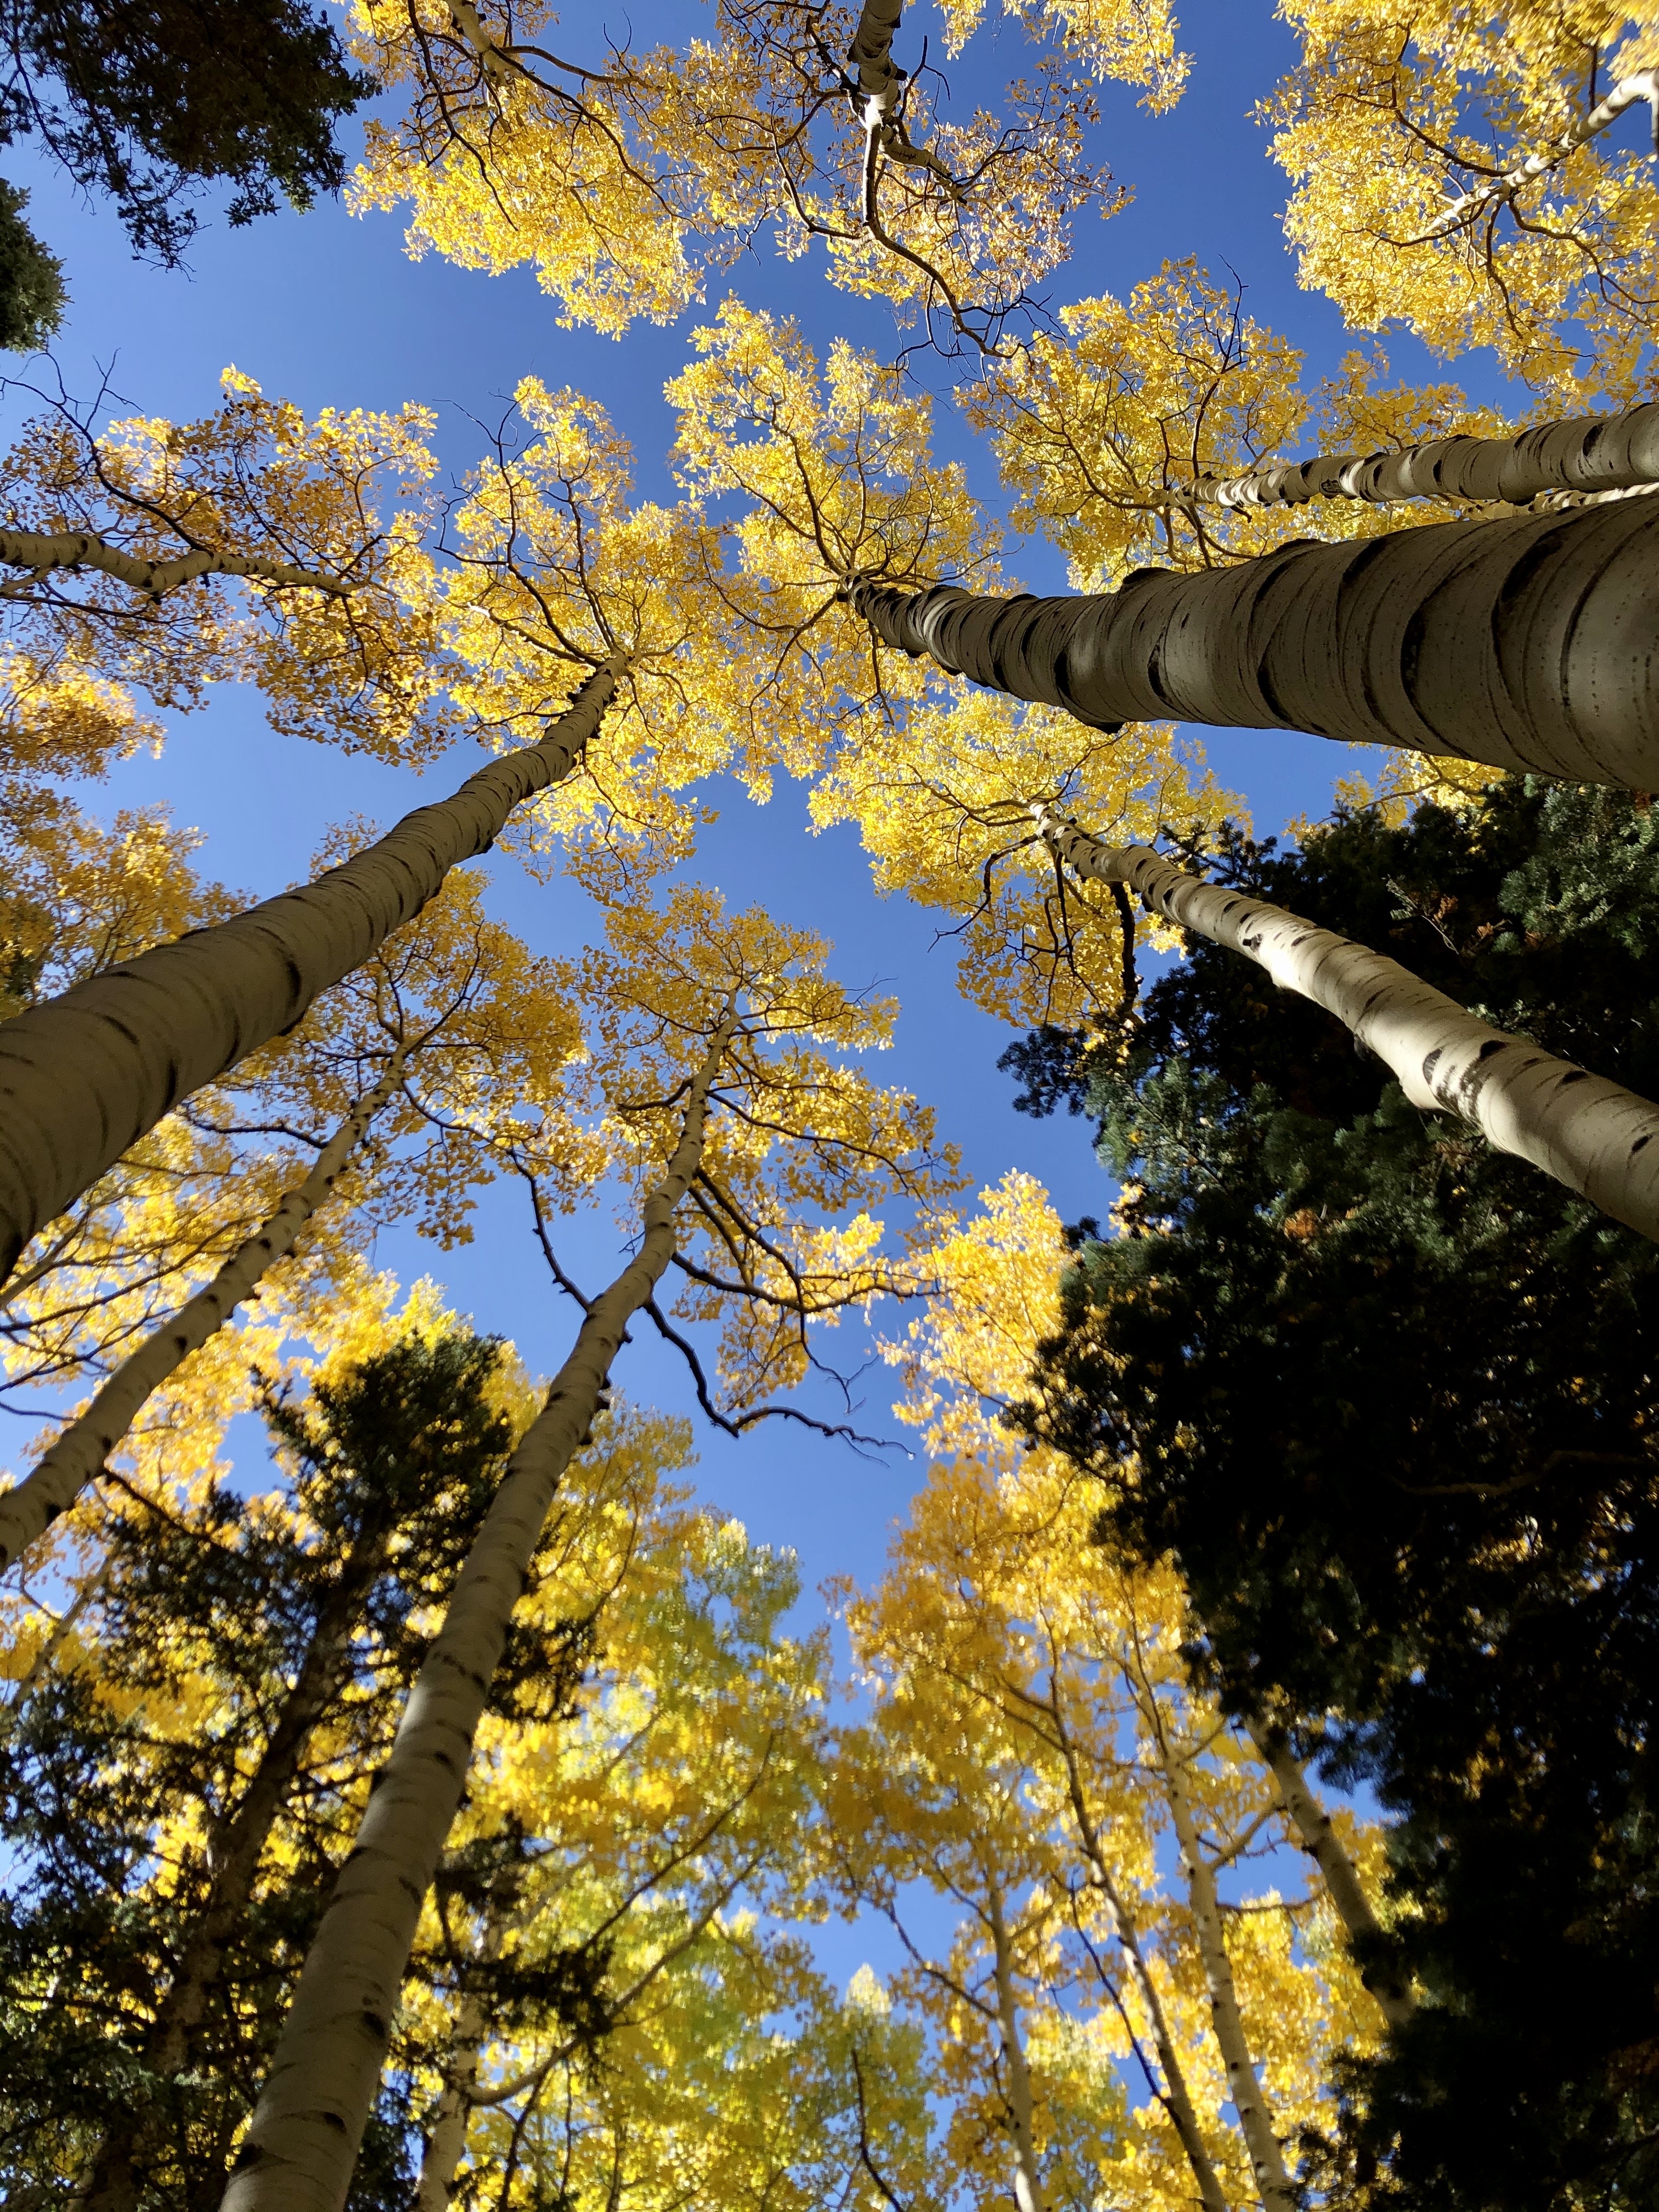 Aspens viewed from underneath looking up